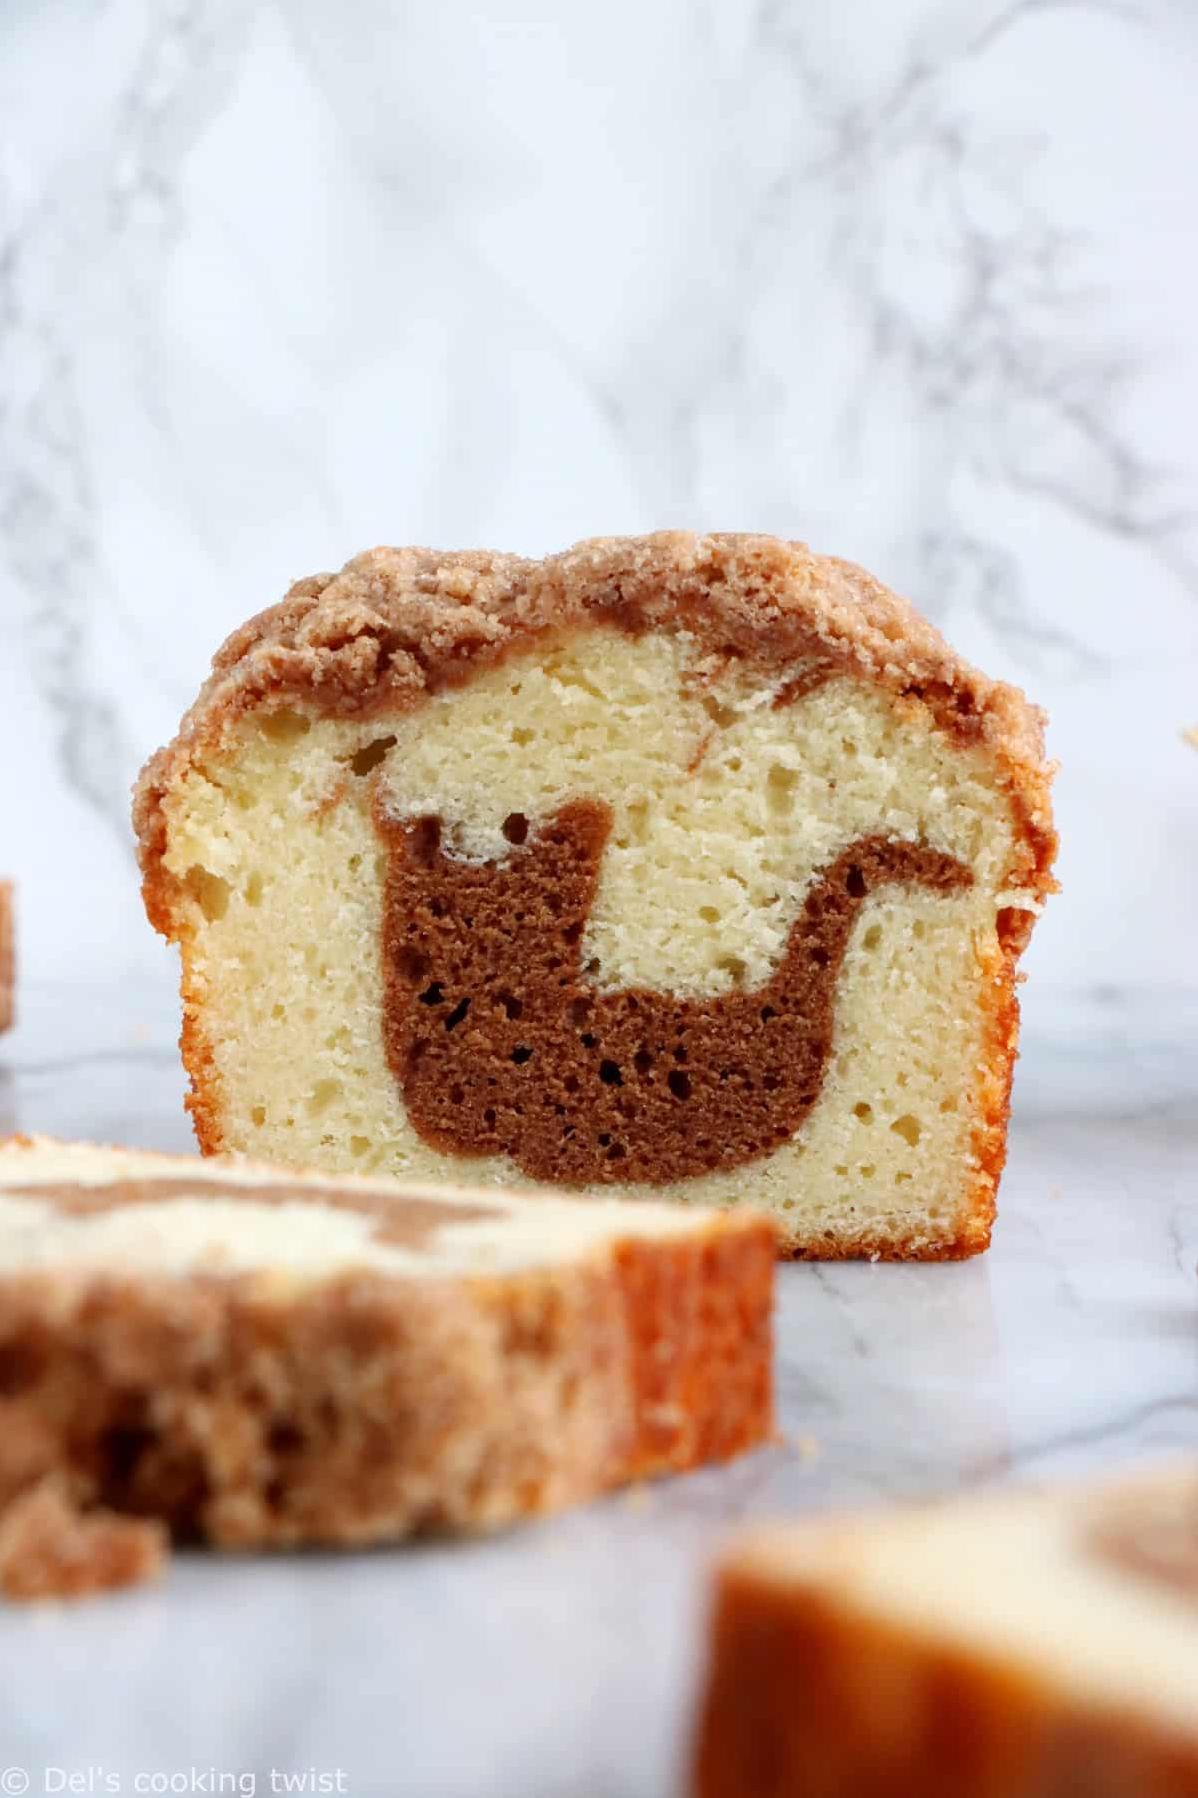  The swirl of cinnamon in this cake will make your taste buds dance with joy 🤤